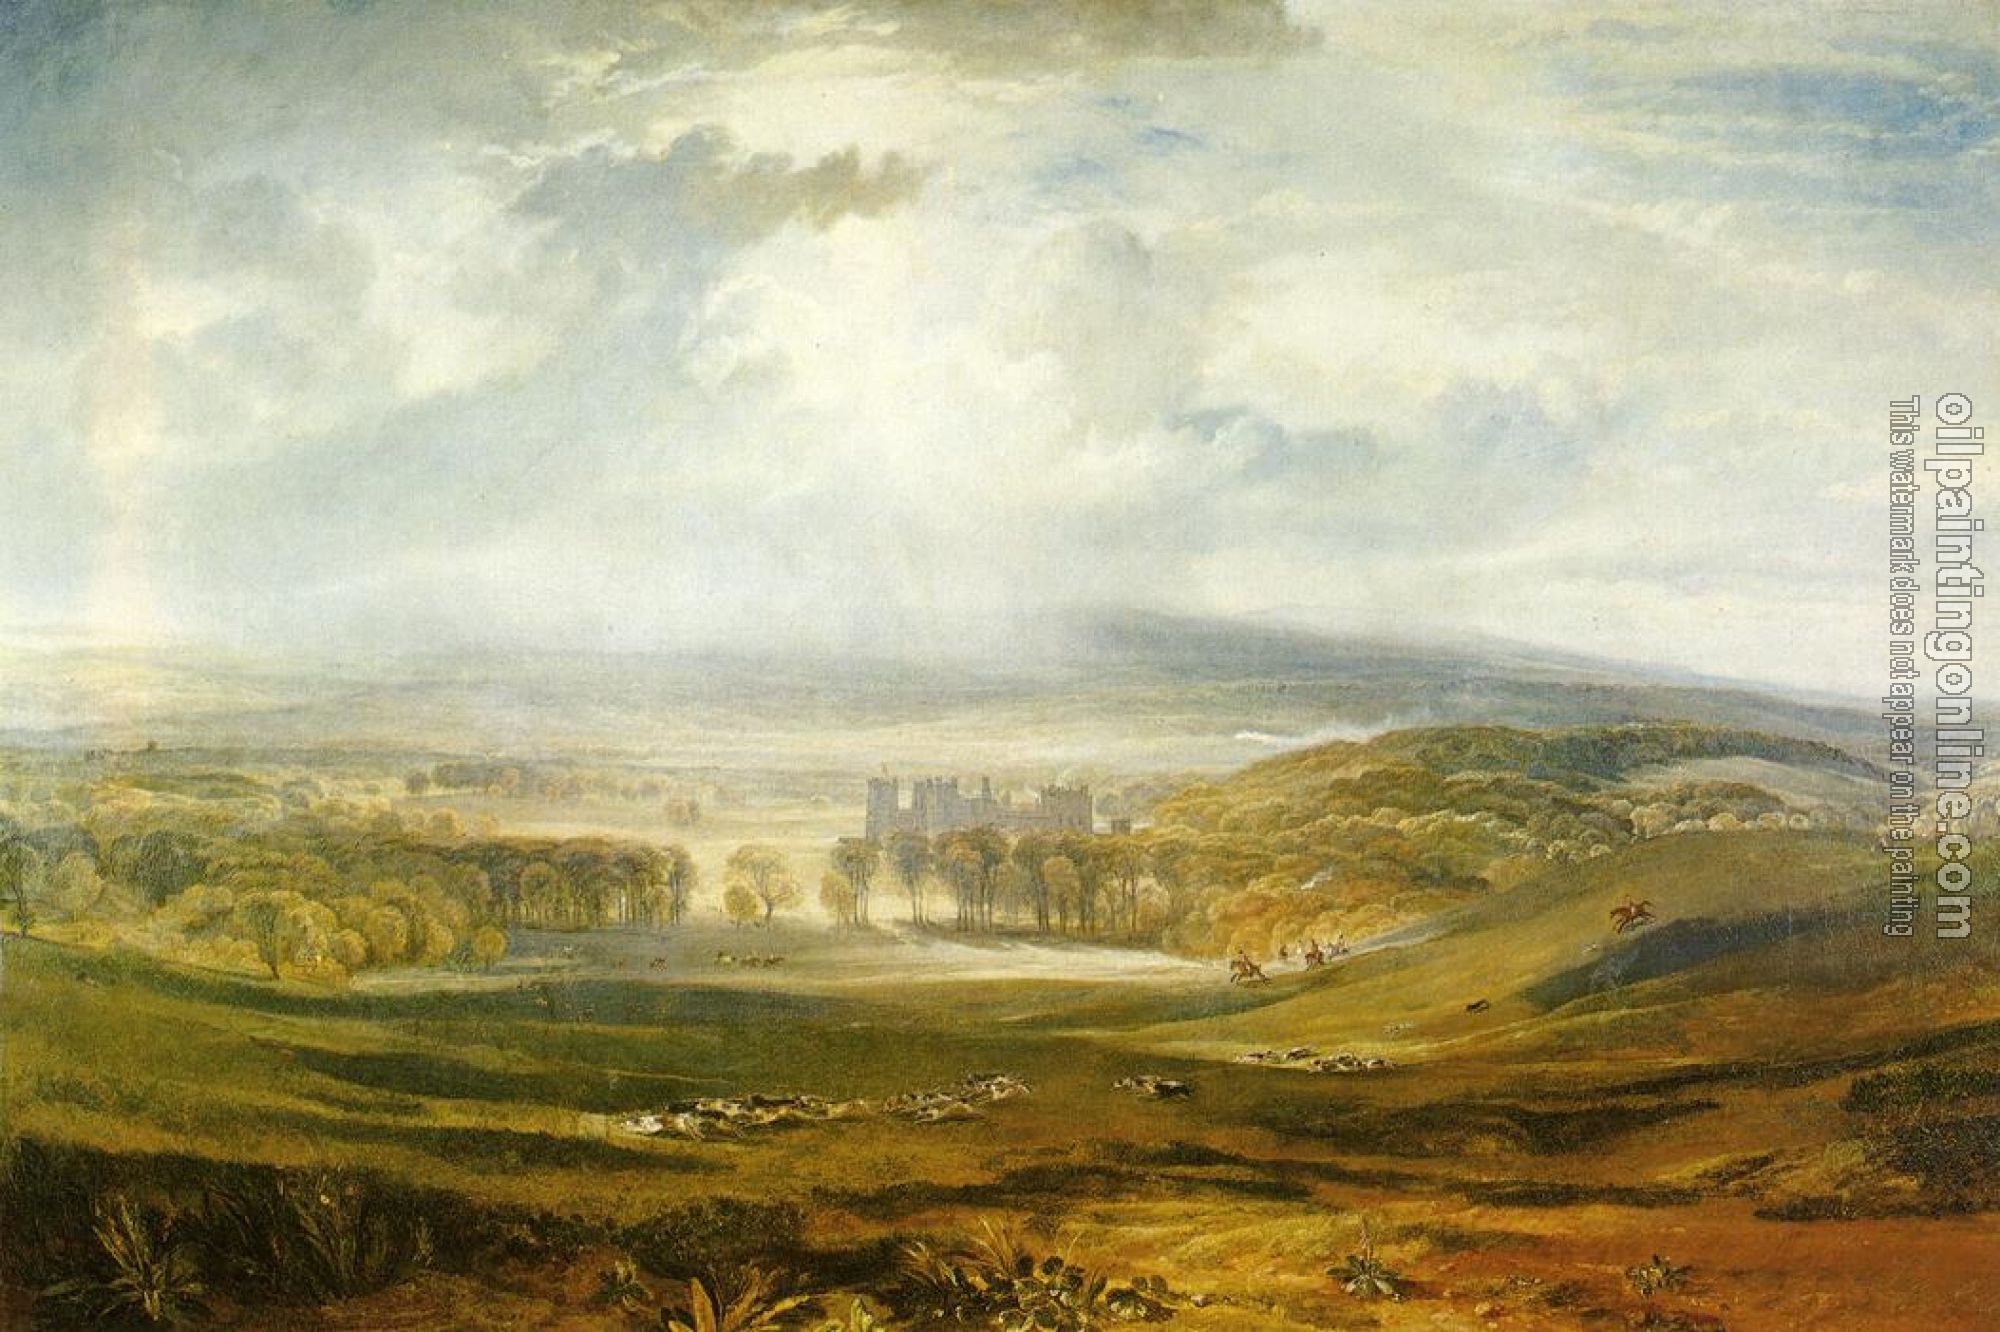 Turner, Joseph Mallord William - Raby Castle, the Seat of the Earl of Darlington